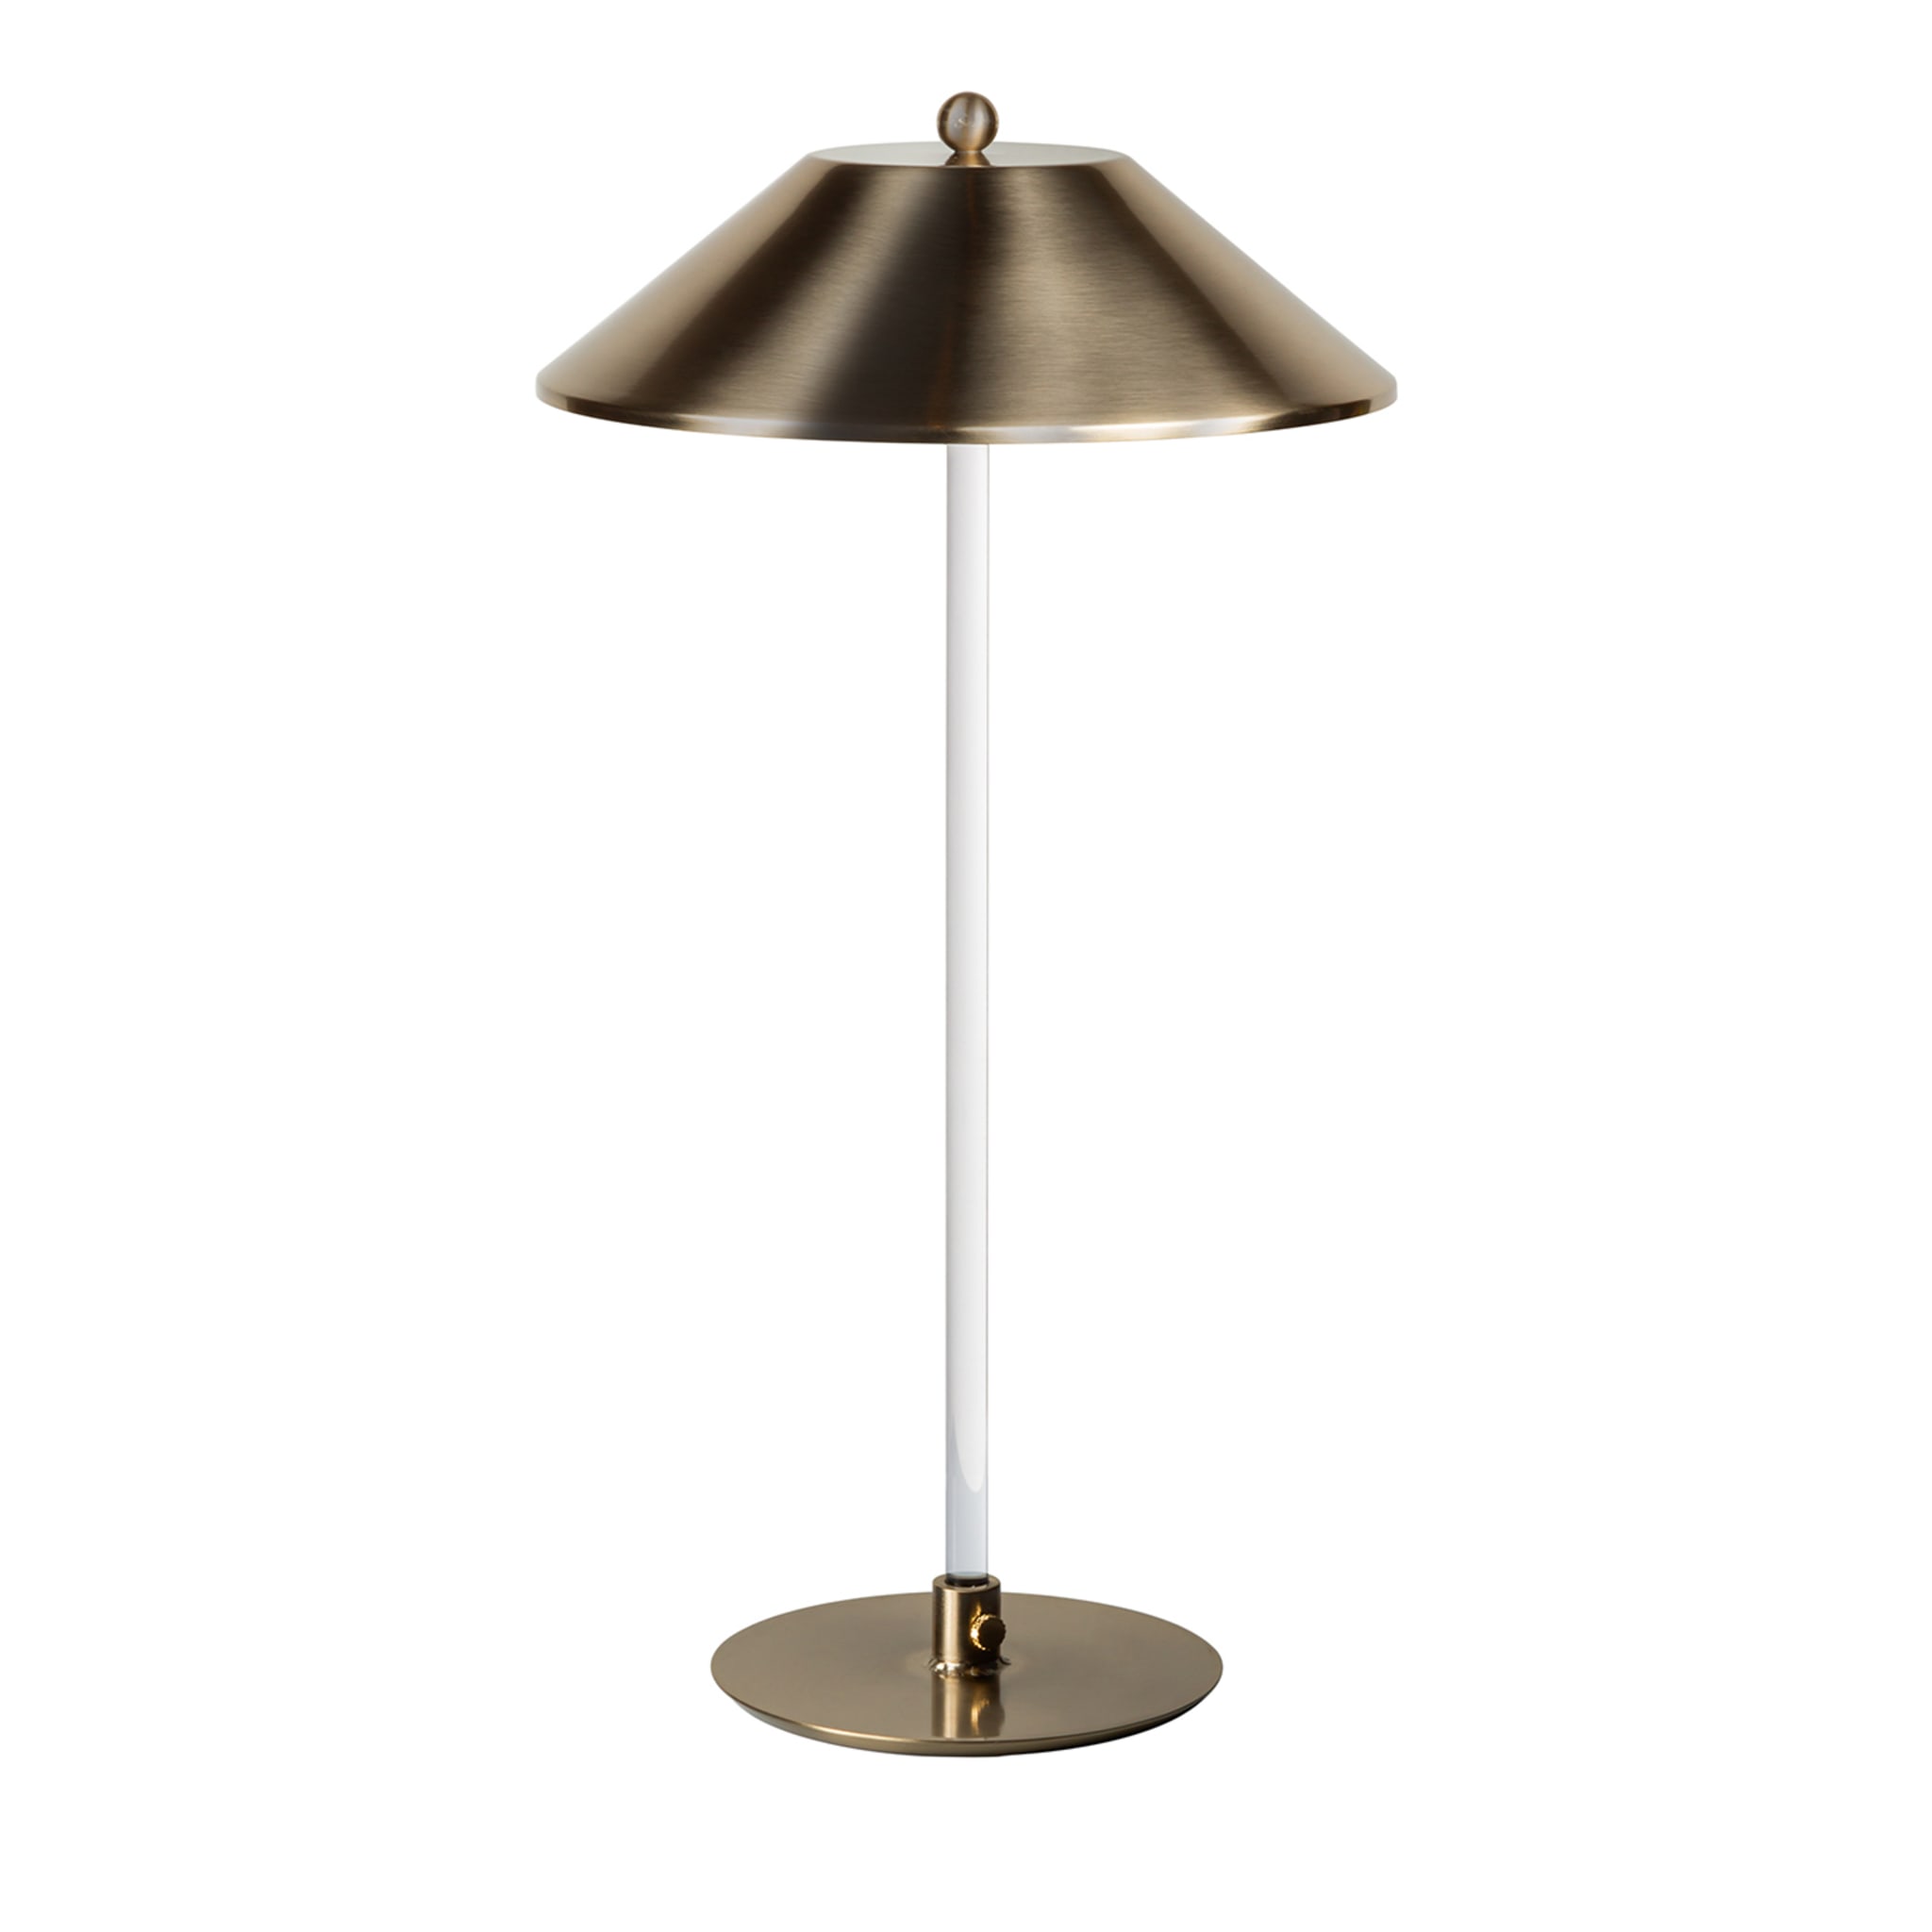 Candilee Champagne Table Lamp by Isacco Brioschi - Main view